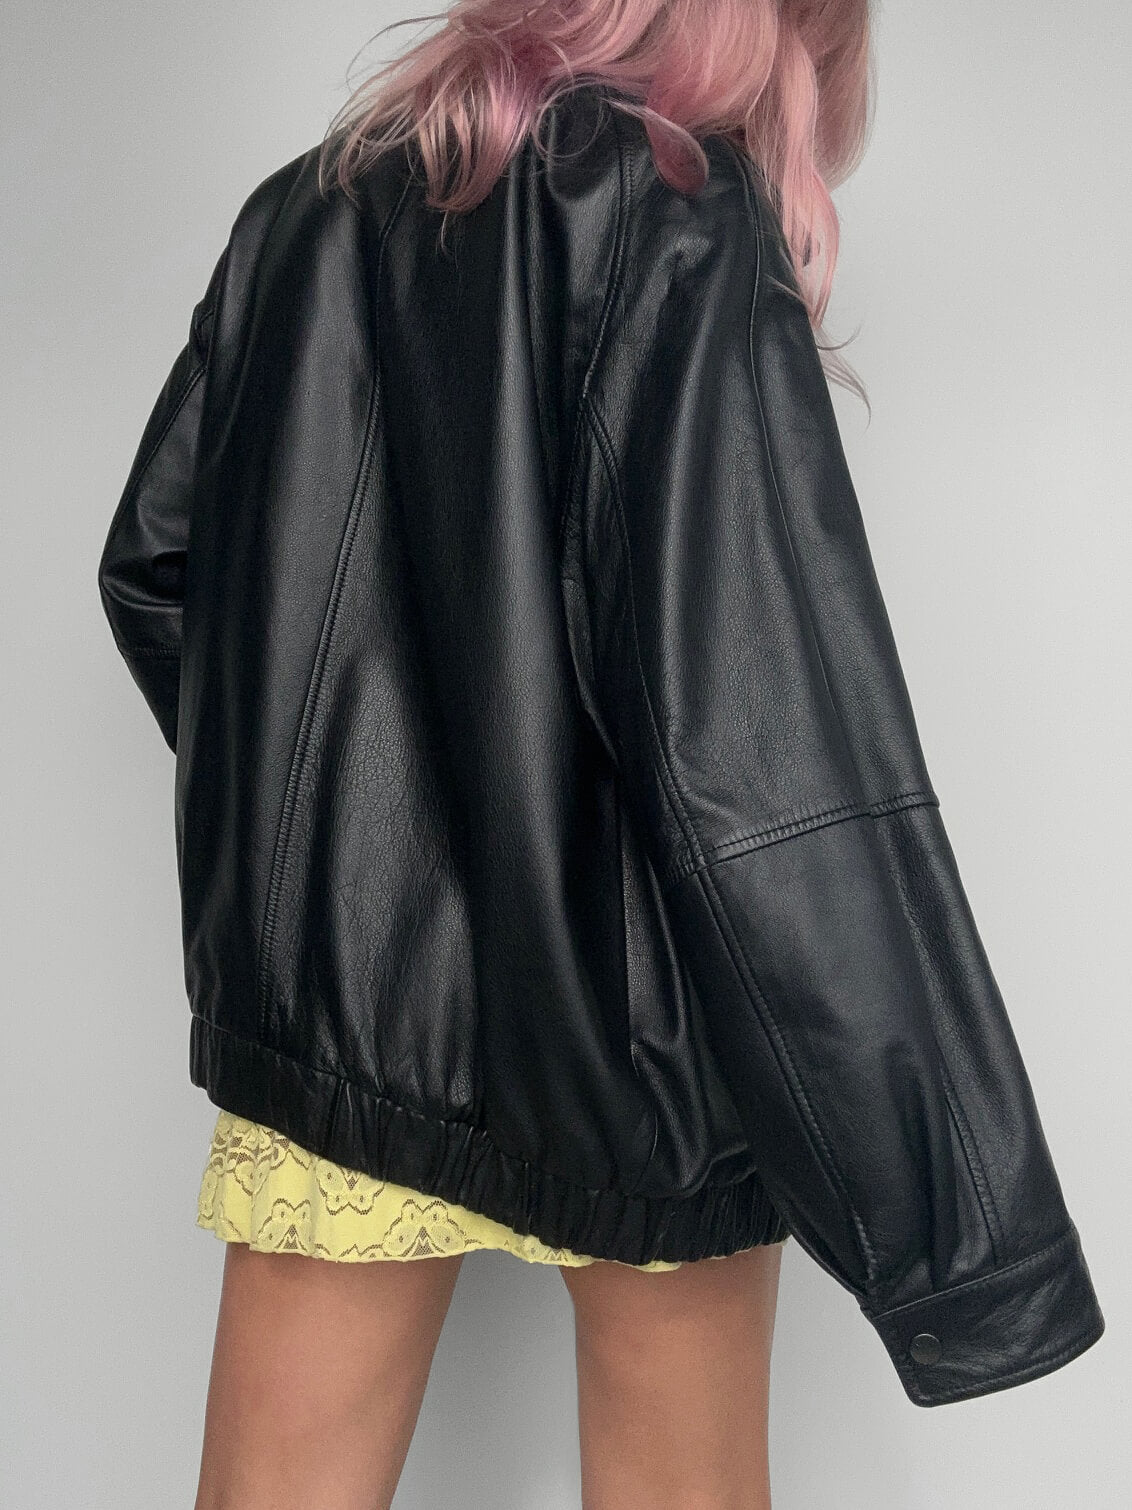 Vintage Oversized Piped Leather Bomber Jacket | XS-XL